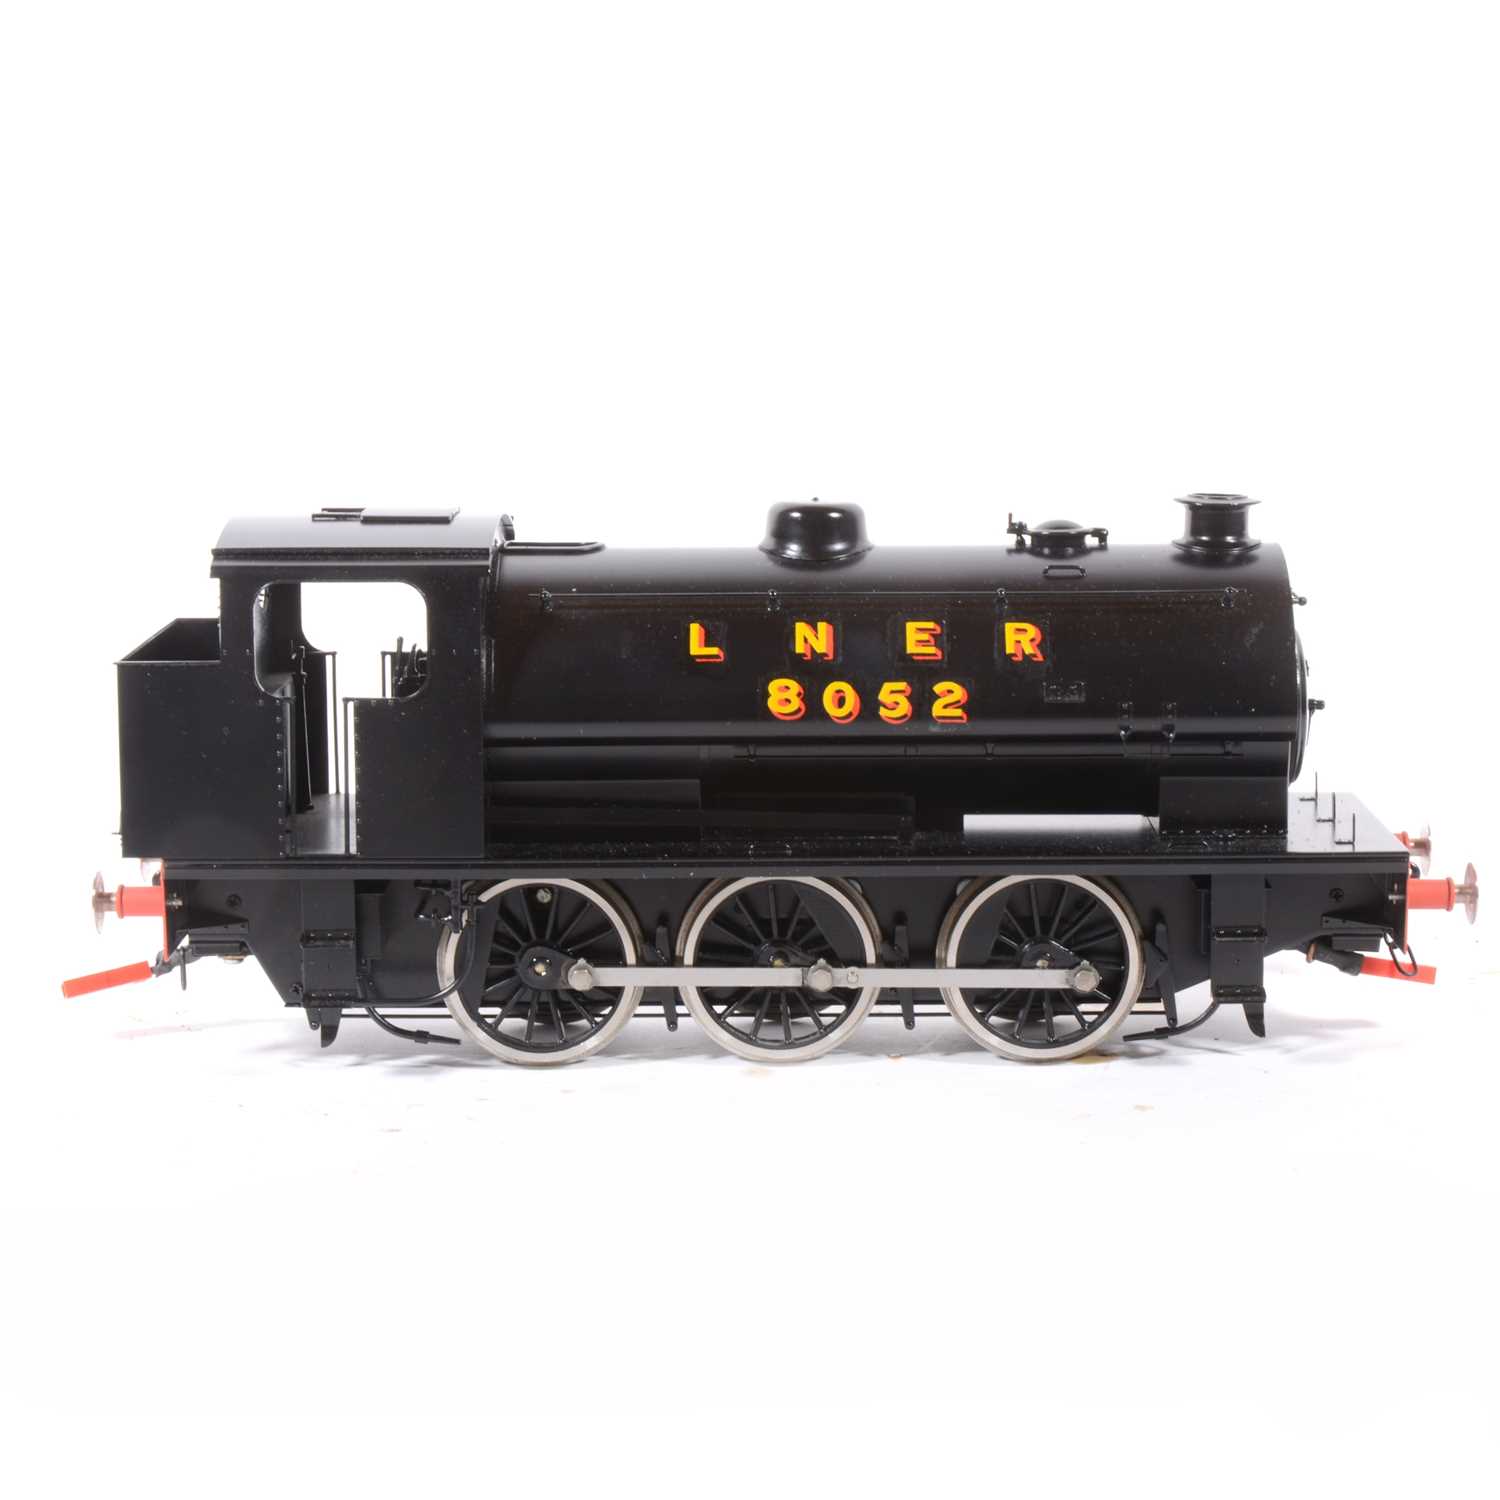 Lot 44 - Bachmann Brassworks electric, gauge 1 / G scale, 45mm locomotive, Class J94, 0-6-0, LNER no.8052, in box, with RC